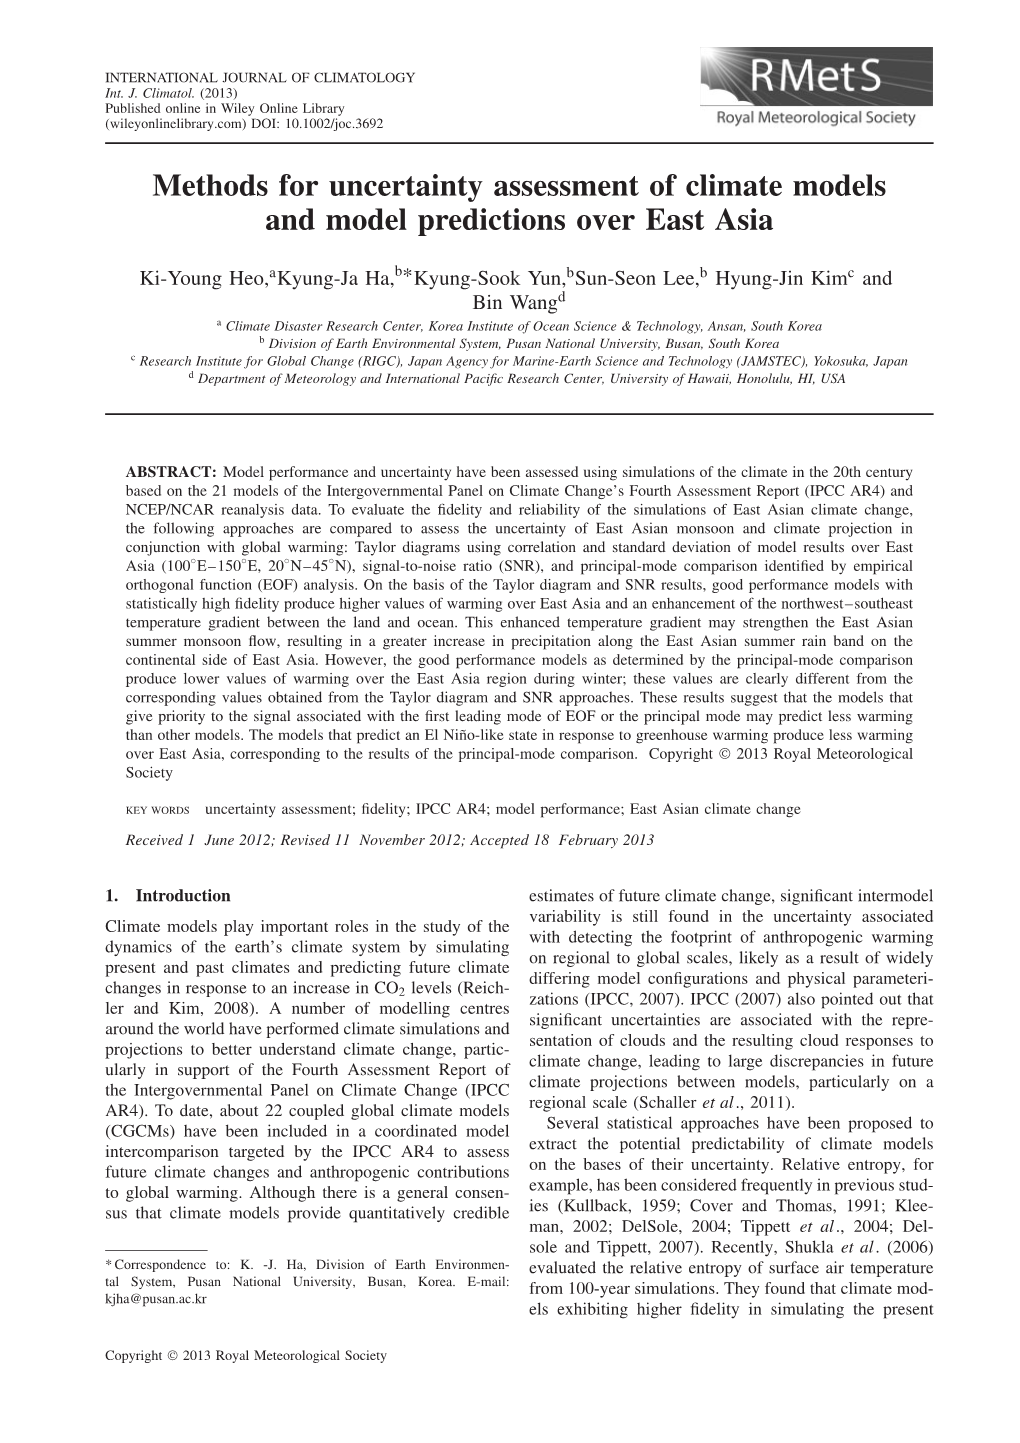 Methods for Uncertainty Assessment of Climate Models and Model Predictions Over East Asia